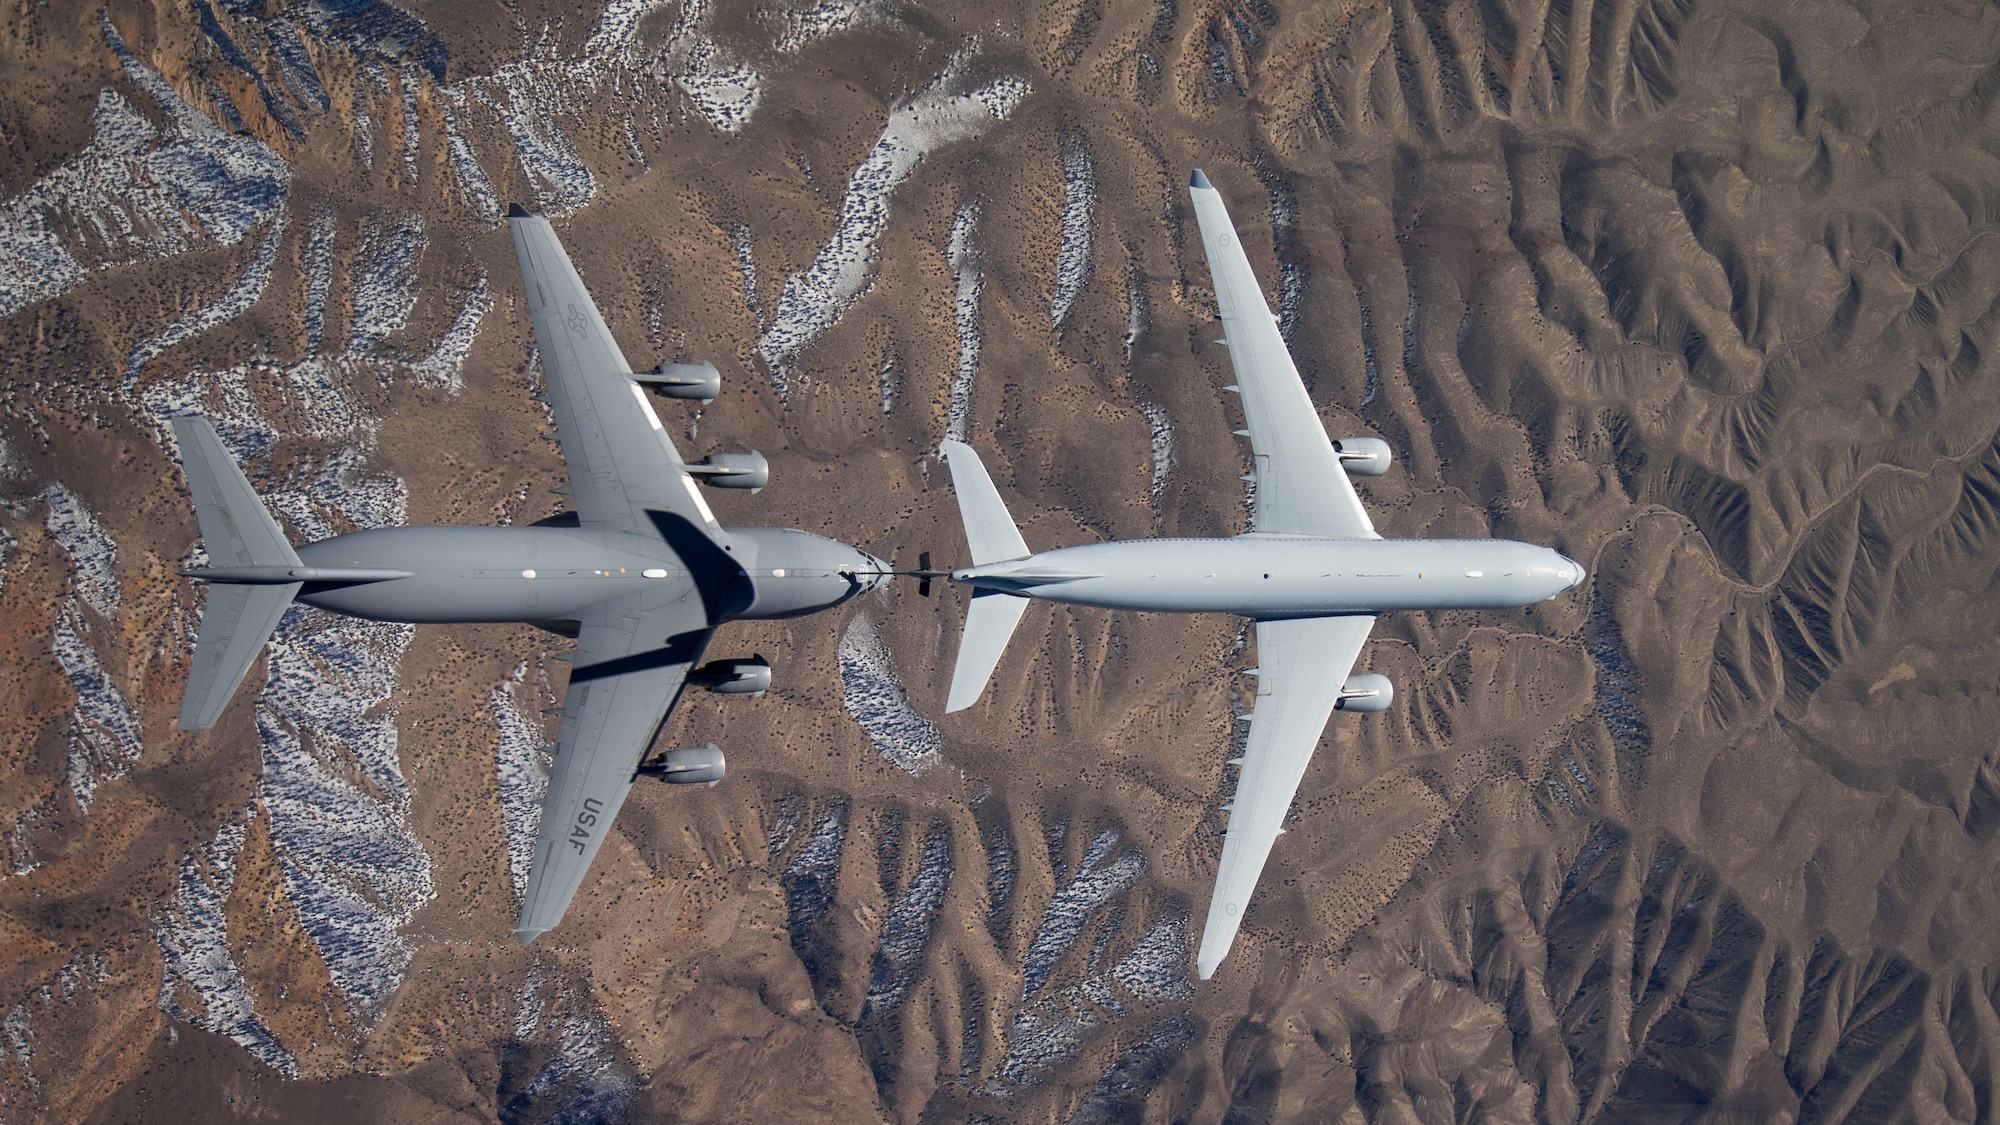 Overhead view of a Royal Australian Air Force KC-30A multirole tanker connecting with a U.S. Air Force C-17 Globemaster III from the 418th Flight Test Squadron at Edwards Air Force Base, Calif., Feb. 10, 2016. (U.S. Air Force photo/Christian Turner)